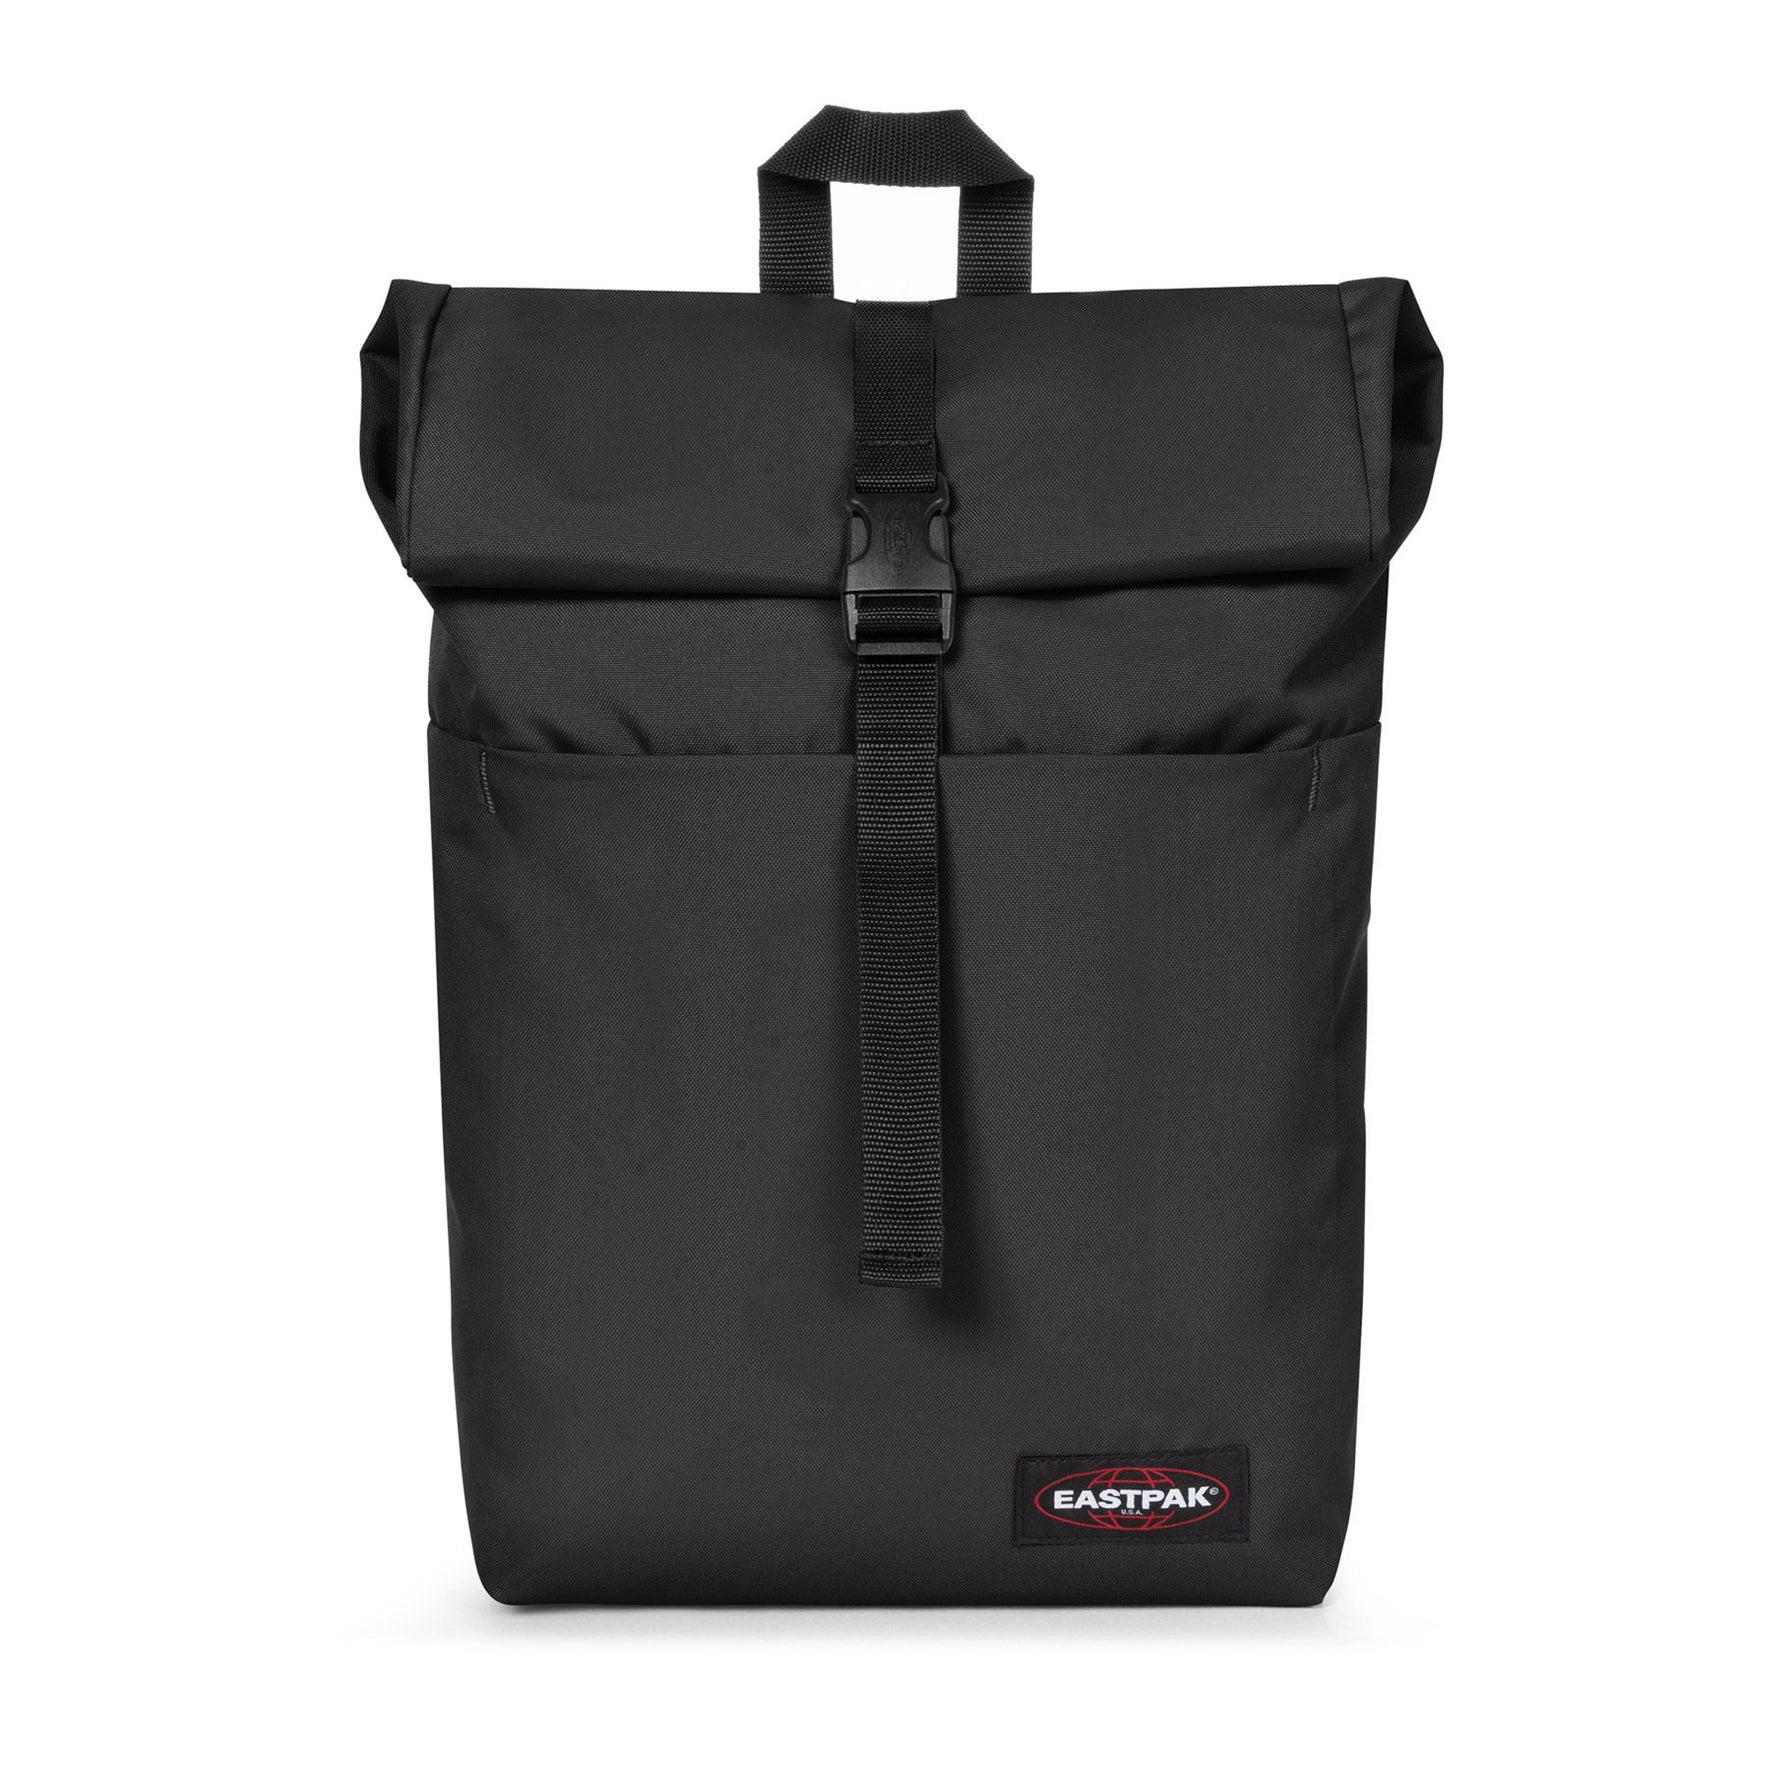 Up Roll Backpack 23L